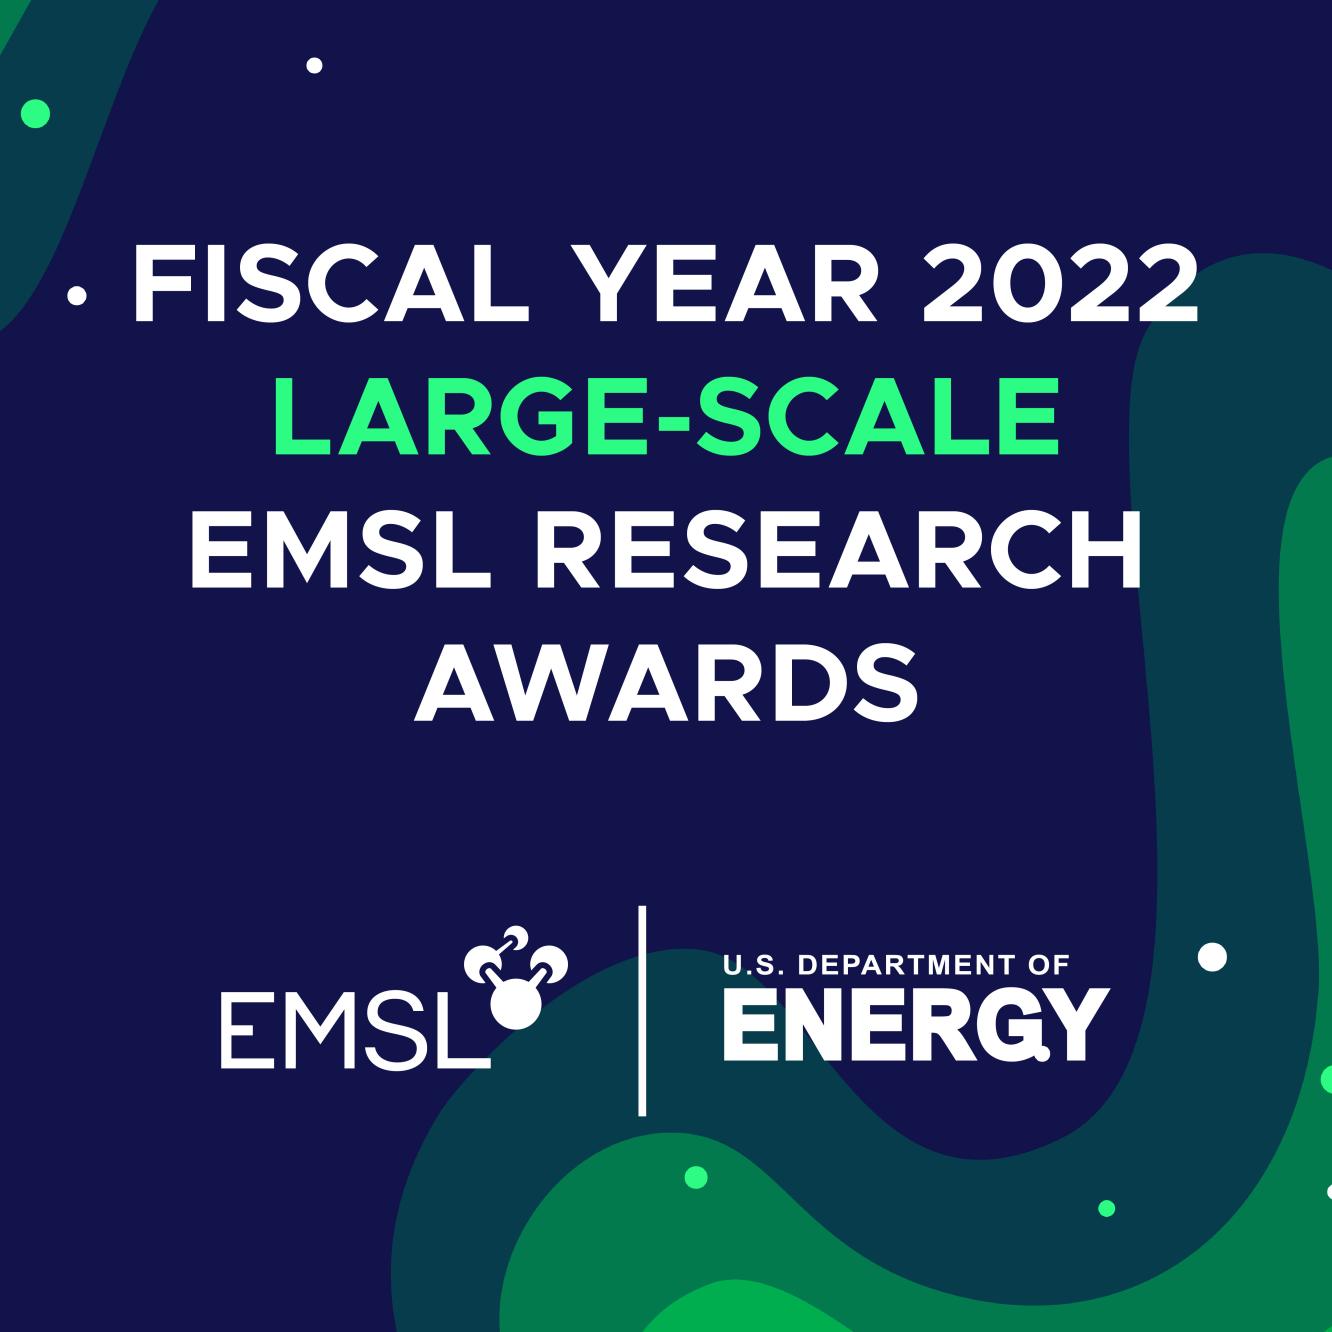 square blue and green graphic with logos for emsl and the department of energy